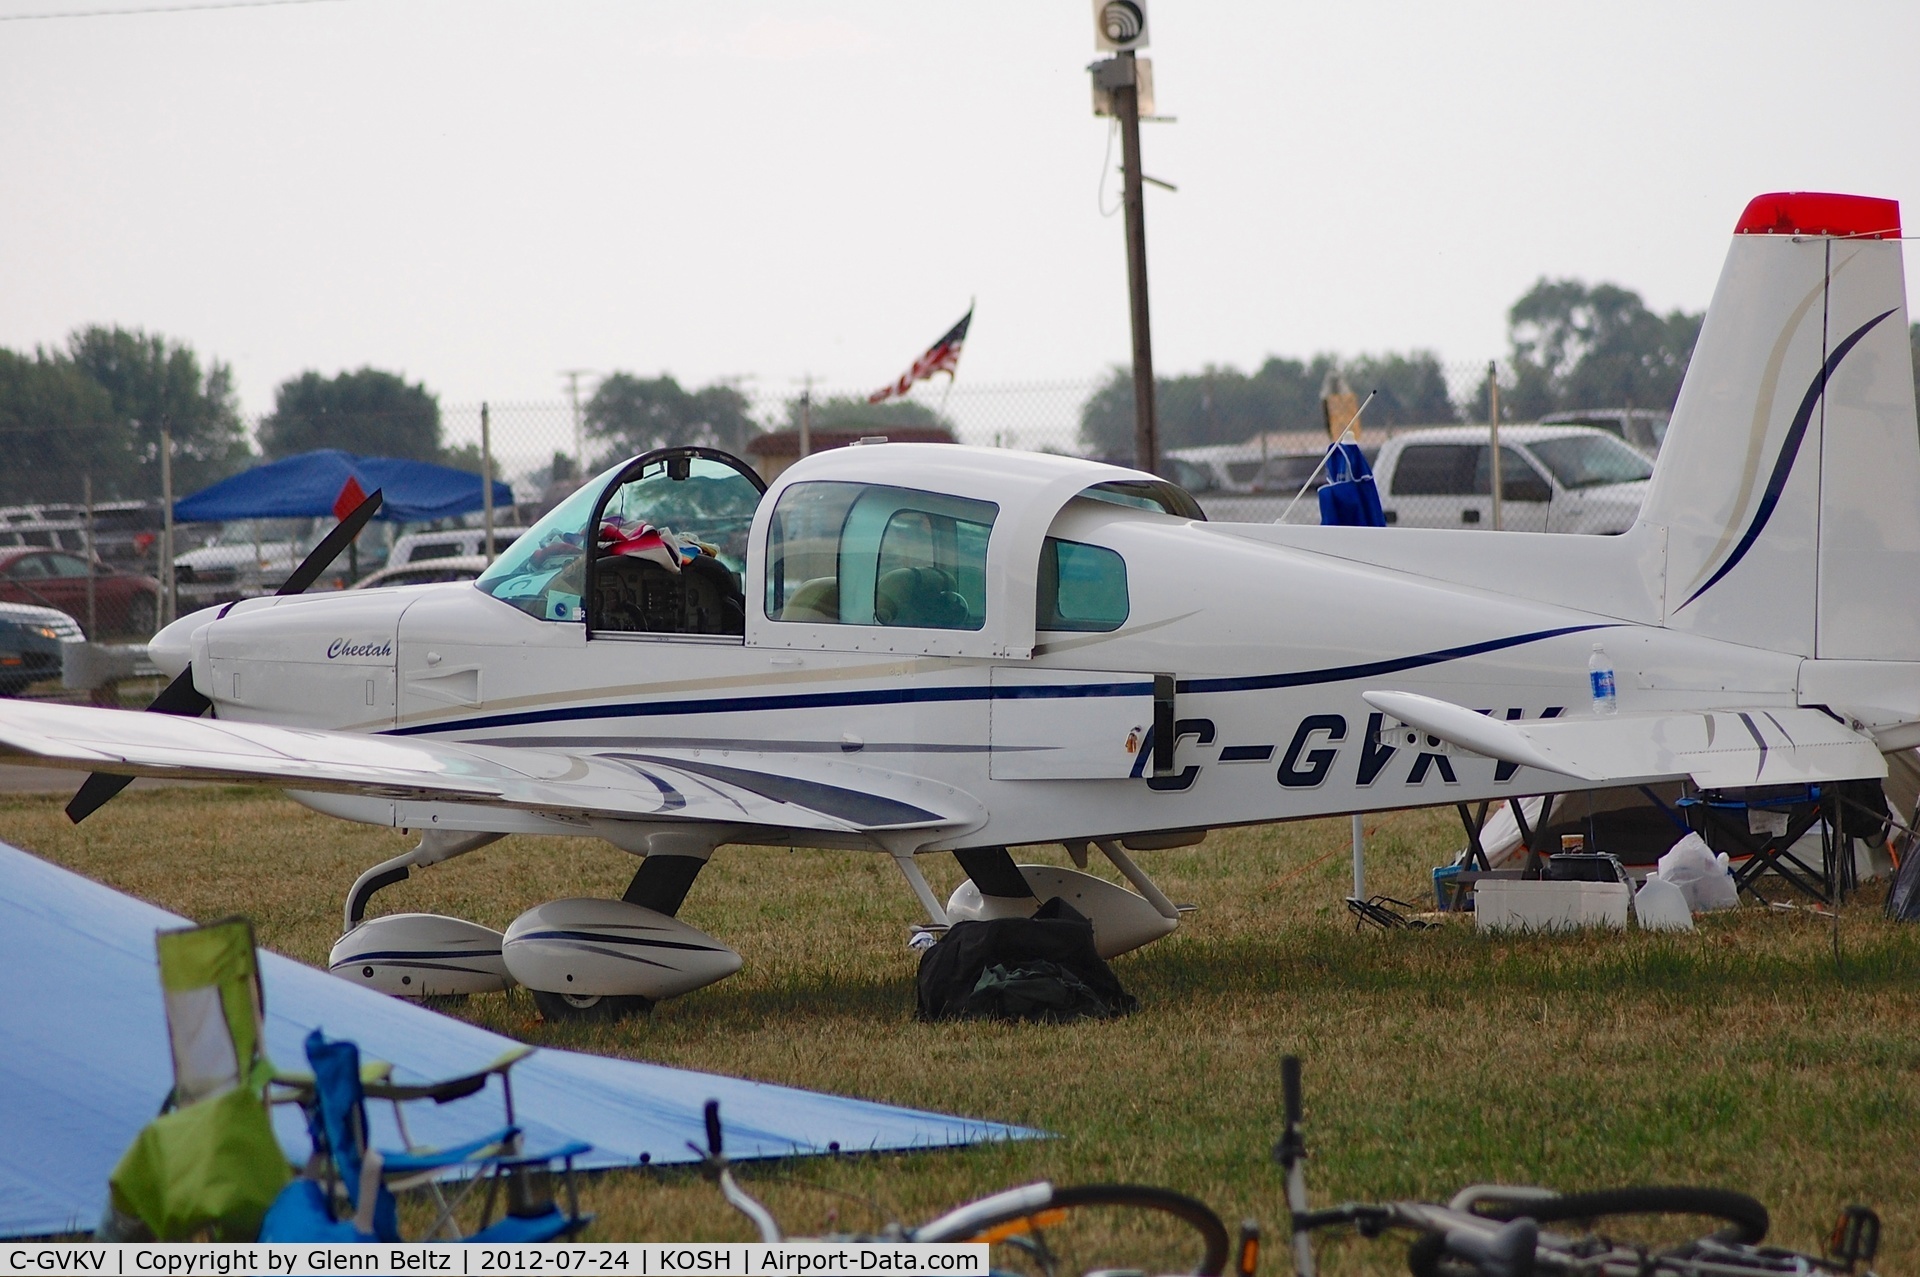 C-GVKV, 1978 American Aviation AA-5A Traveler C/N AA5A-0784, Parked at EAA Airventure/Oshkosh on 24 July 2012